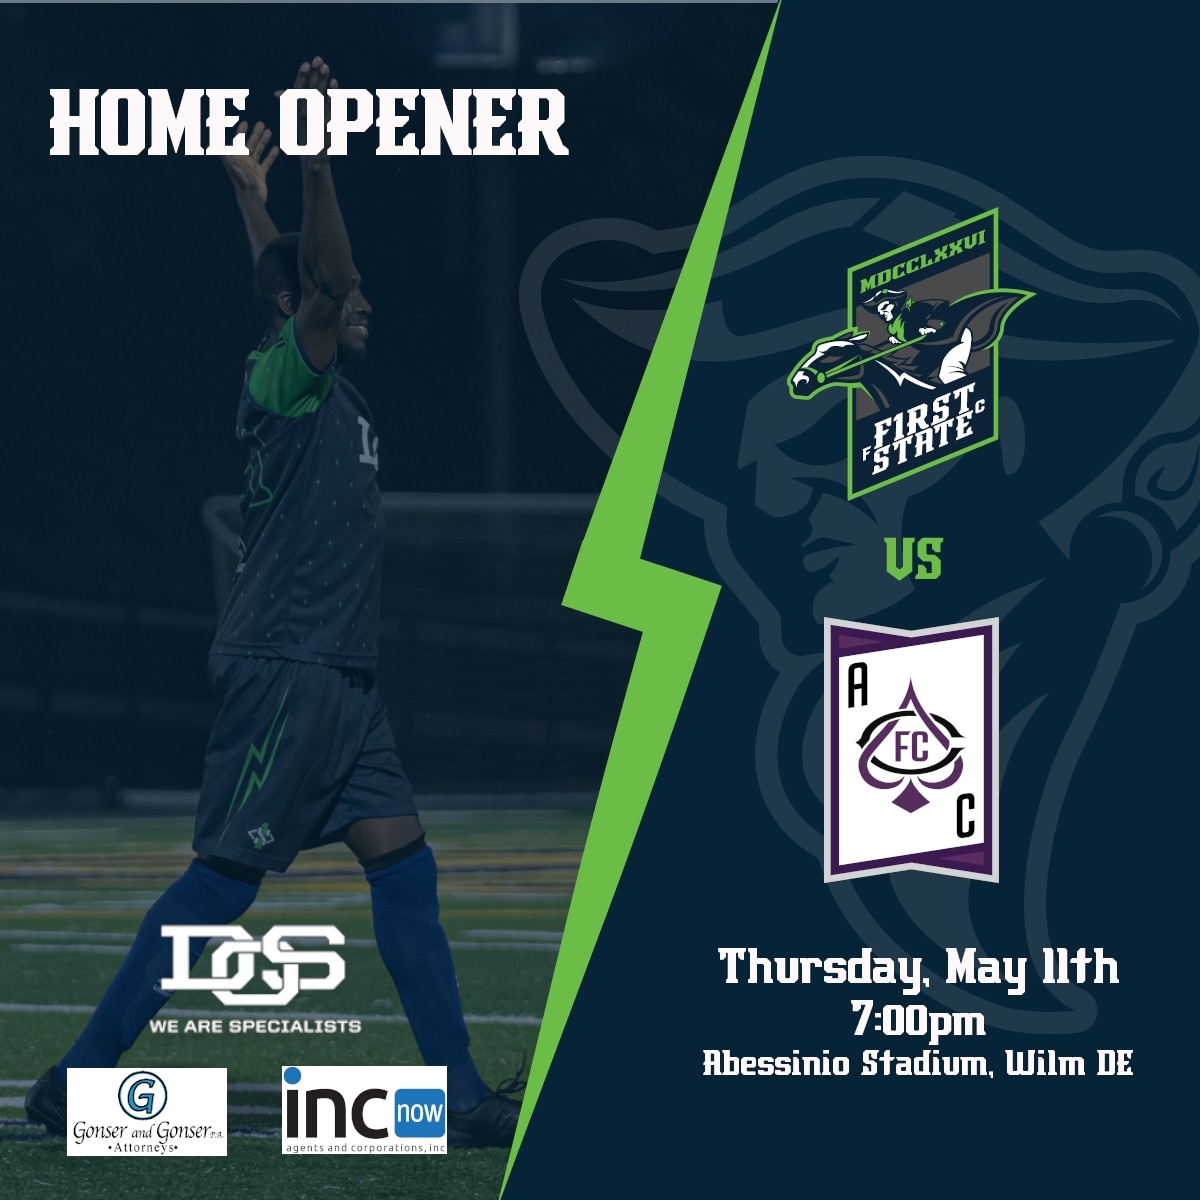 Less than 48 hours until our 2023 szn is 🚀🚀🚀 Come check us out this Thursday night @ Abessinio Stadium in Wilm! Tix 🎟️🎟️ on sale now at tickets.firststatefc.com